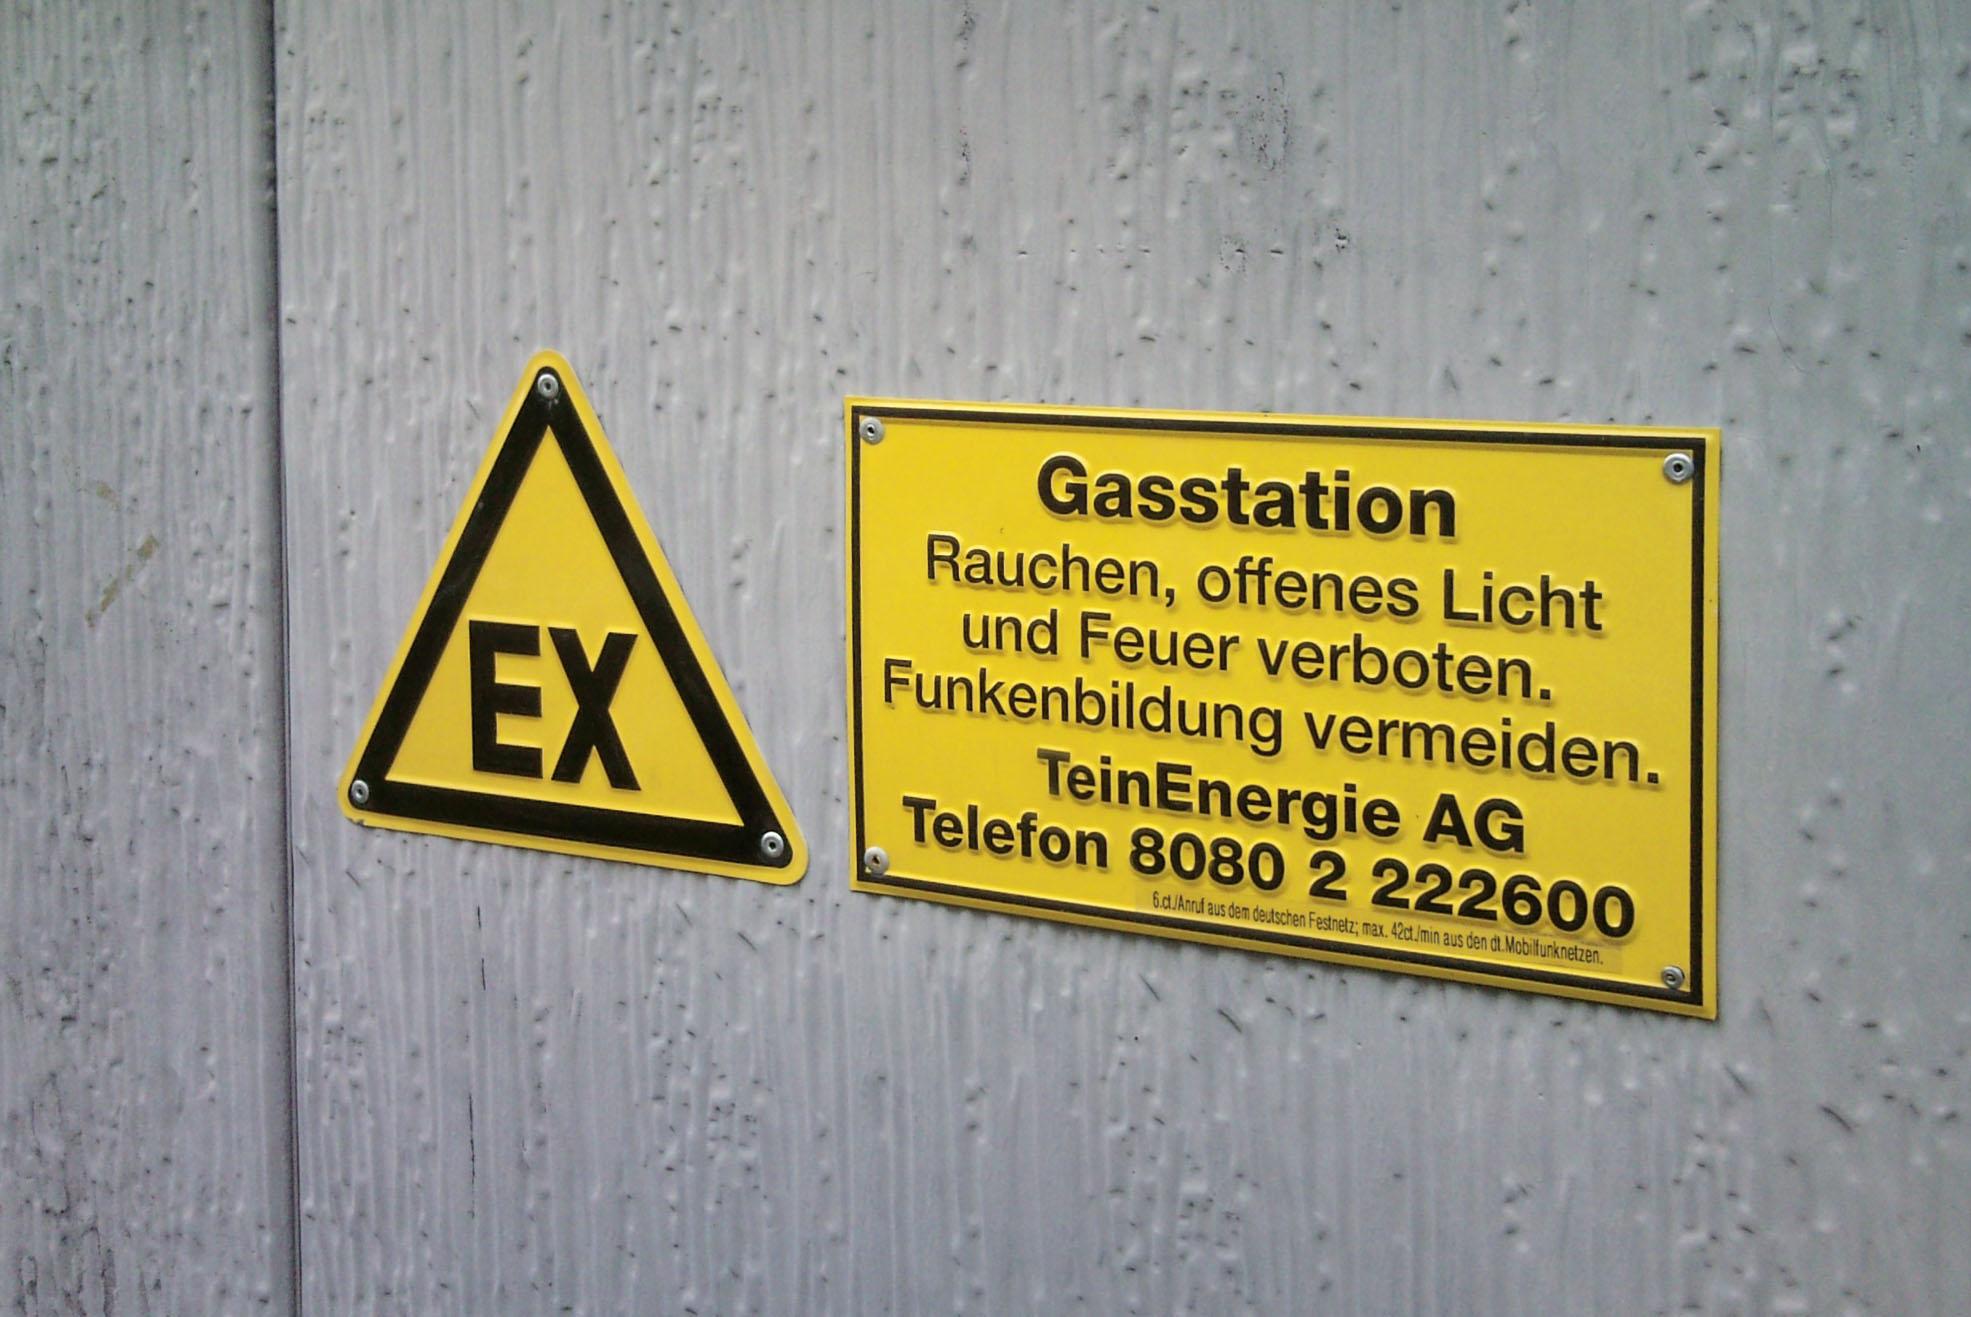 Ex area sign in Germany